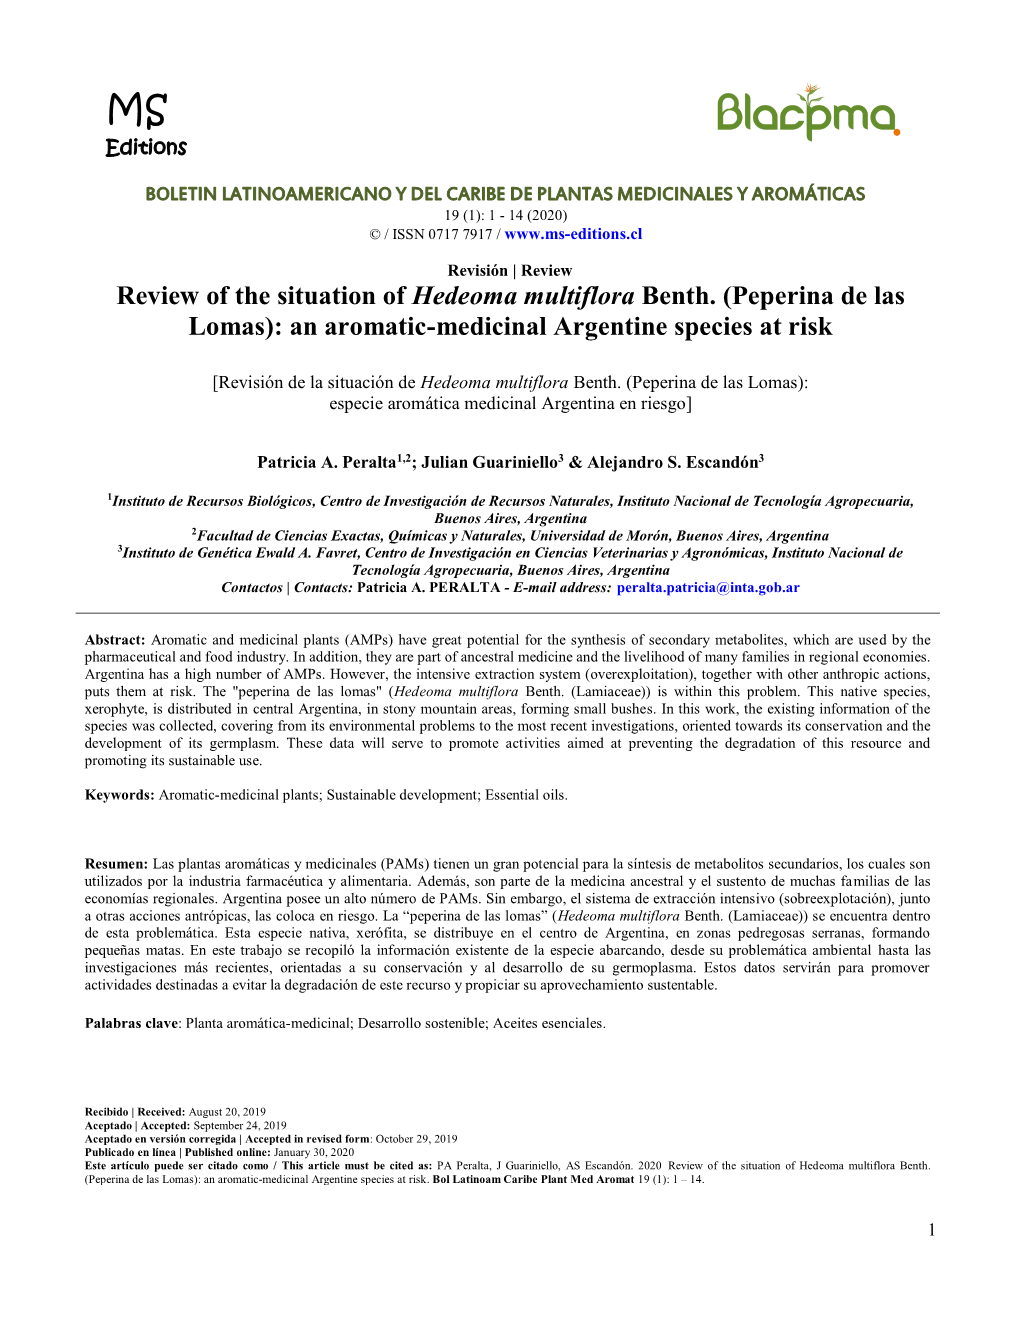 Review of the Situation of Hedeoma Multiflora Benth. (Peperina De Las Lomas): an Aromatic-Medicinal Argentine Species at Risk